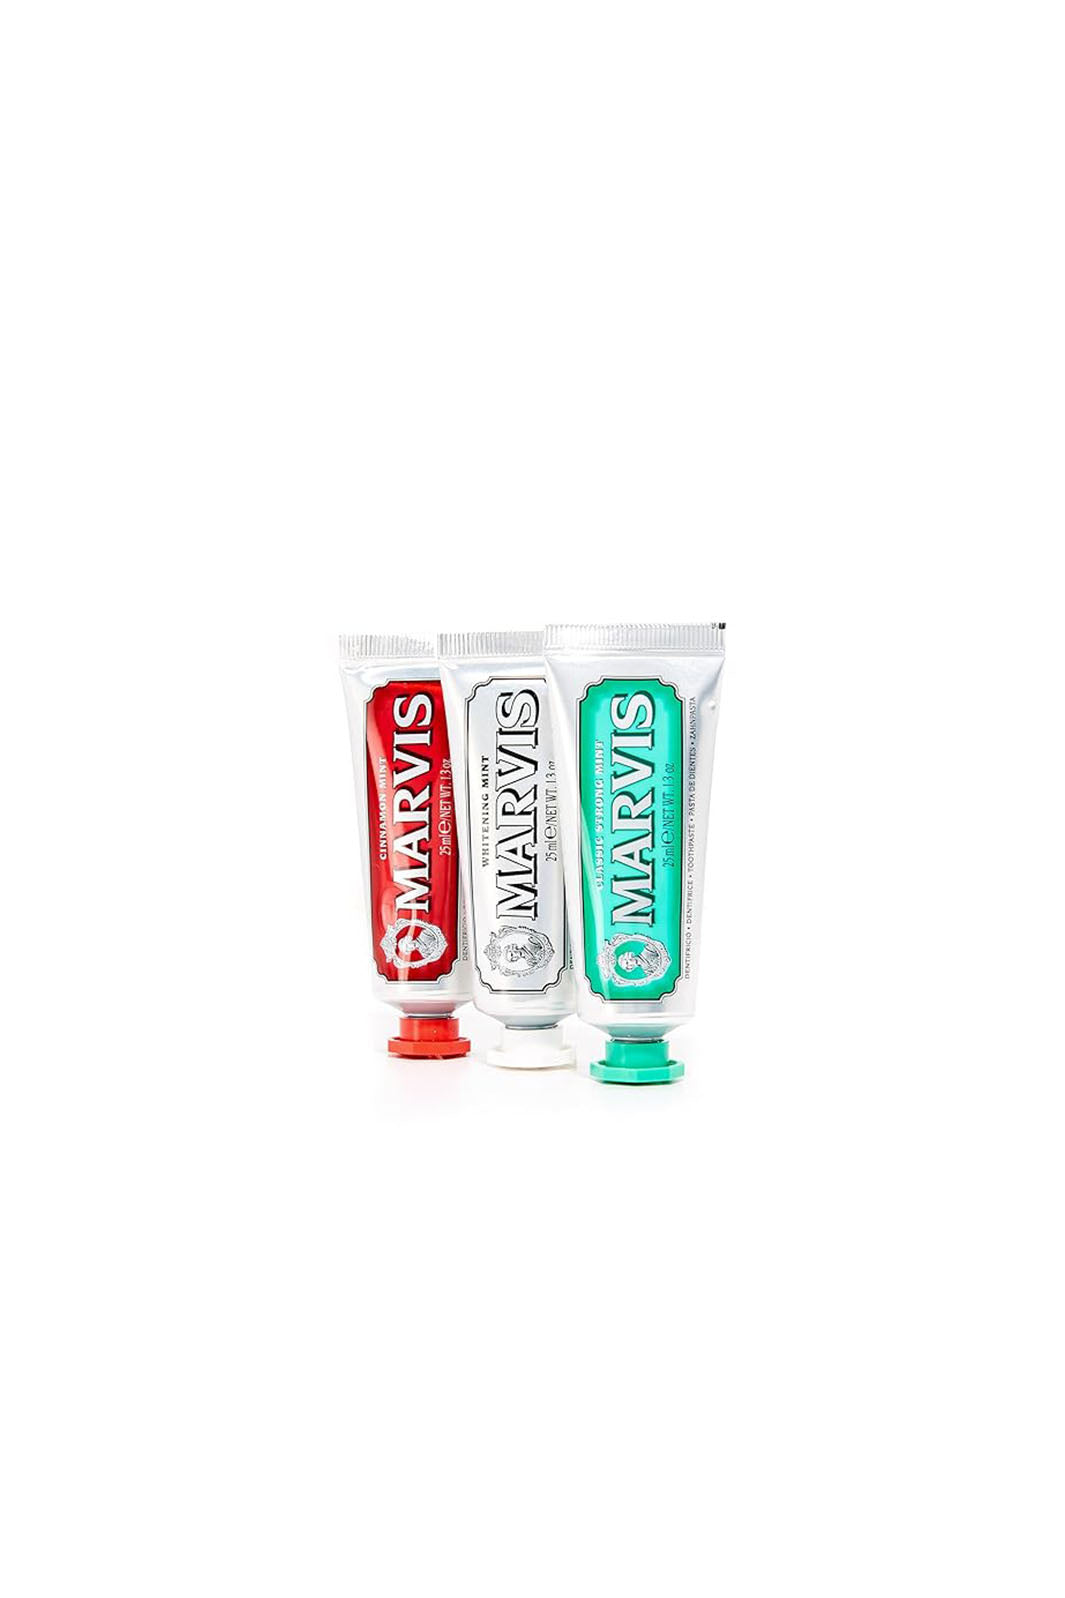 Marvis Toothpaste Gift Set, 3 Pack